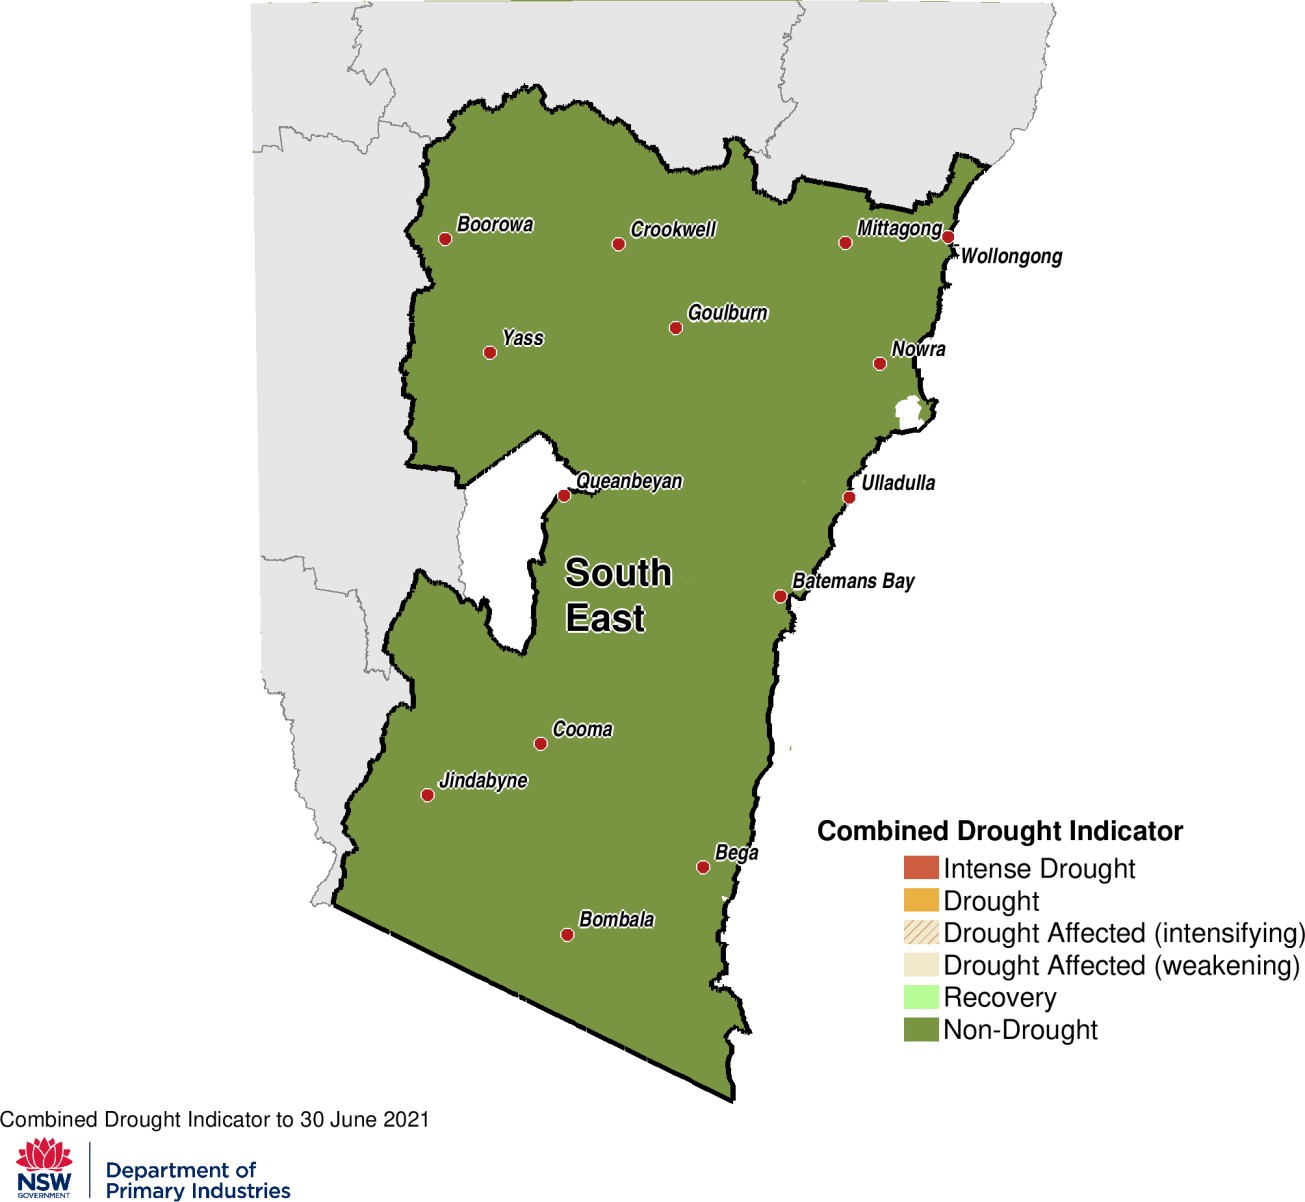 Combined Drought Indicator for the South East region